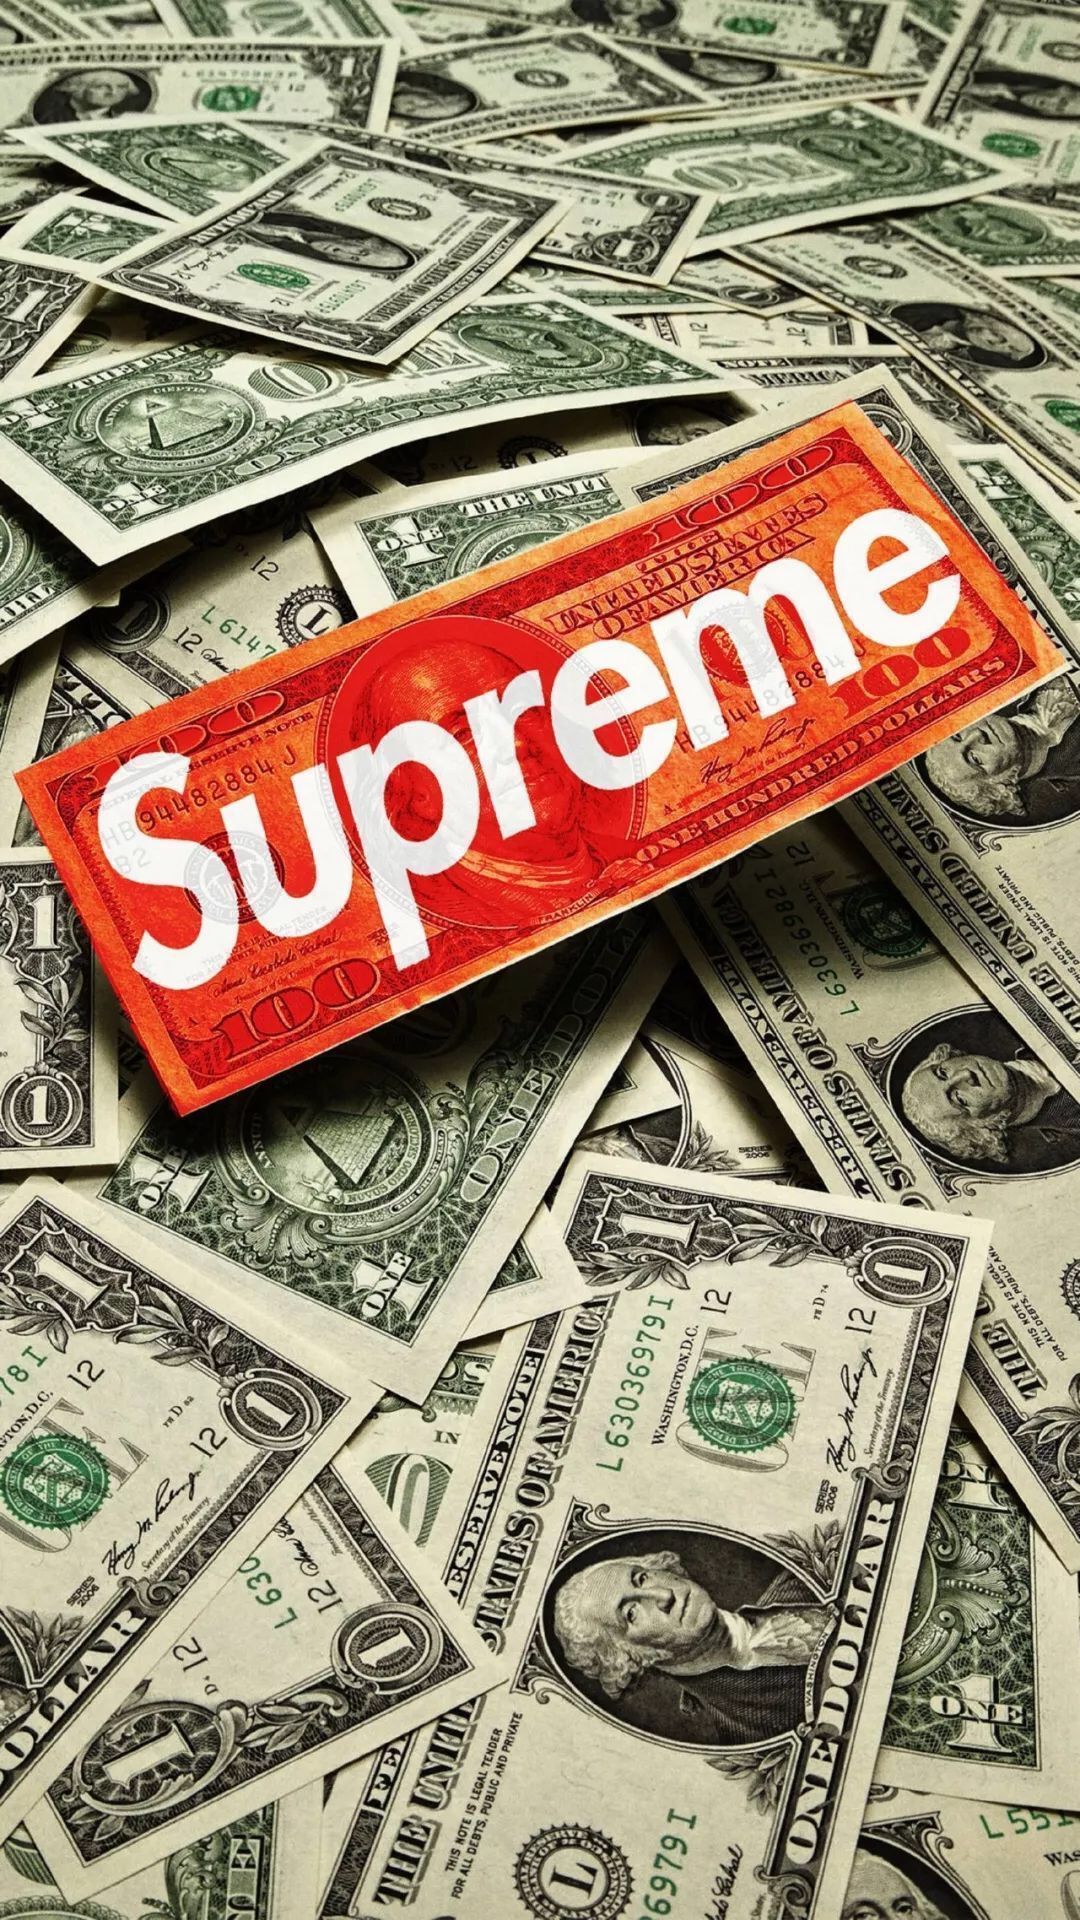 Gold Money iPhone Background. Supreme iphone wallpaper, Supreme wallpaper, iPhone background